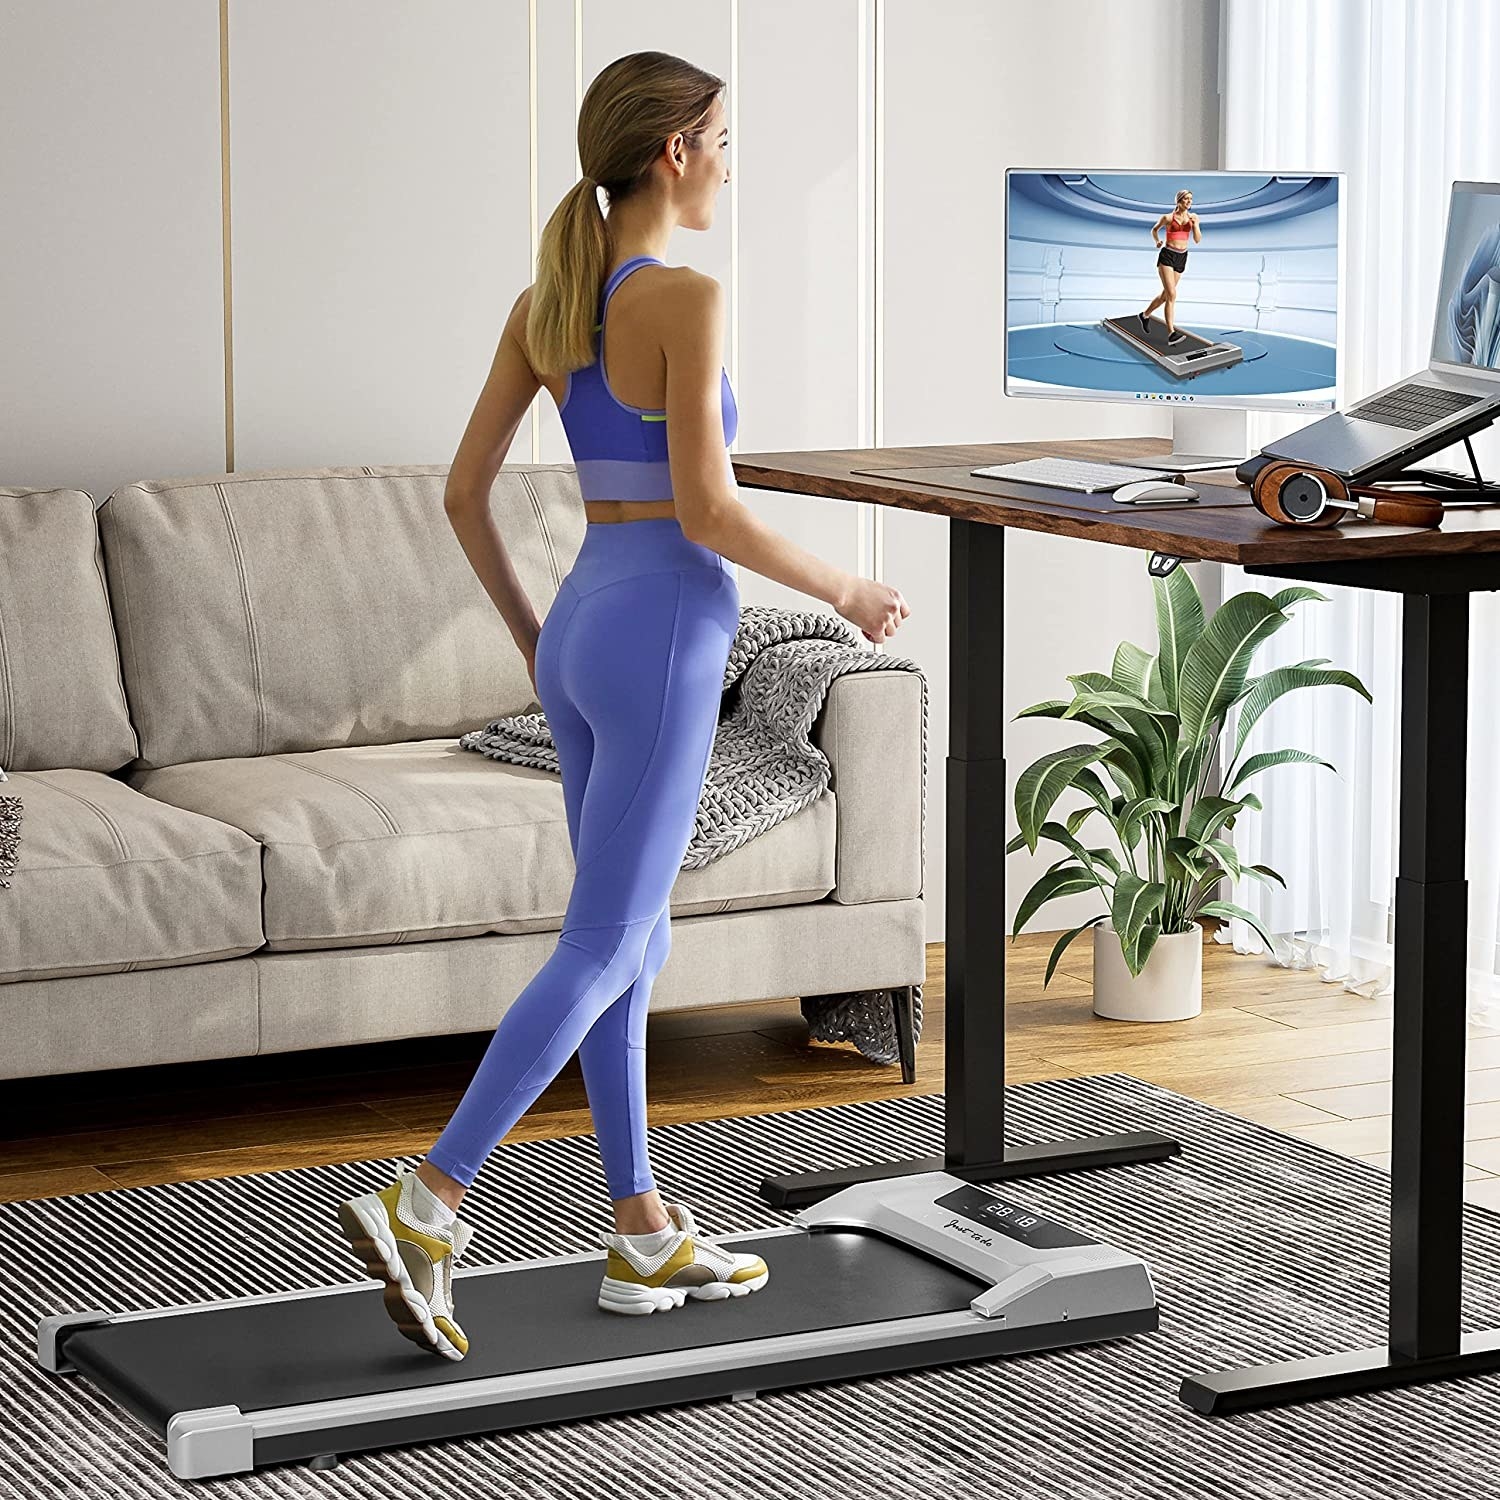 person walking on the treadmill while working at the standing desk